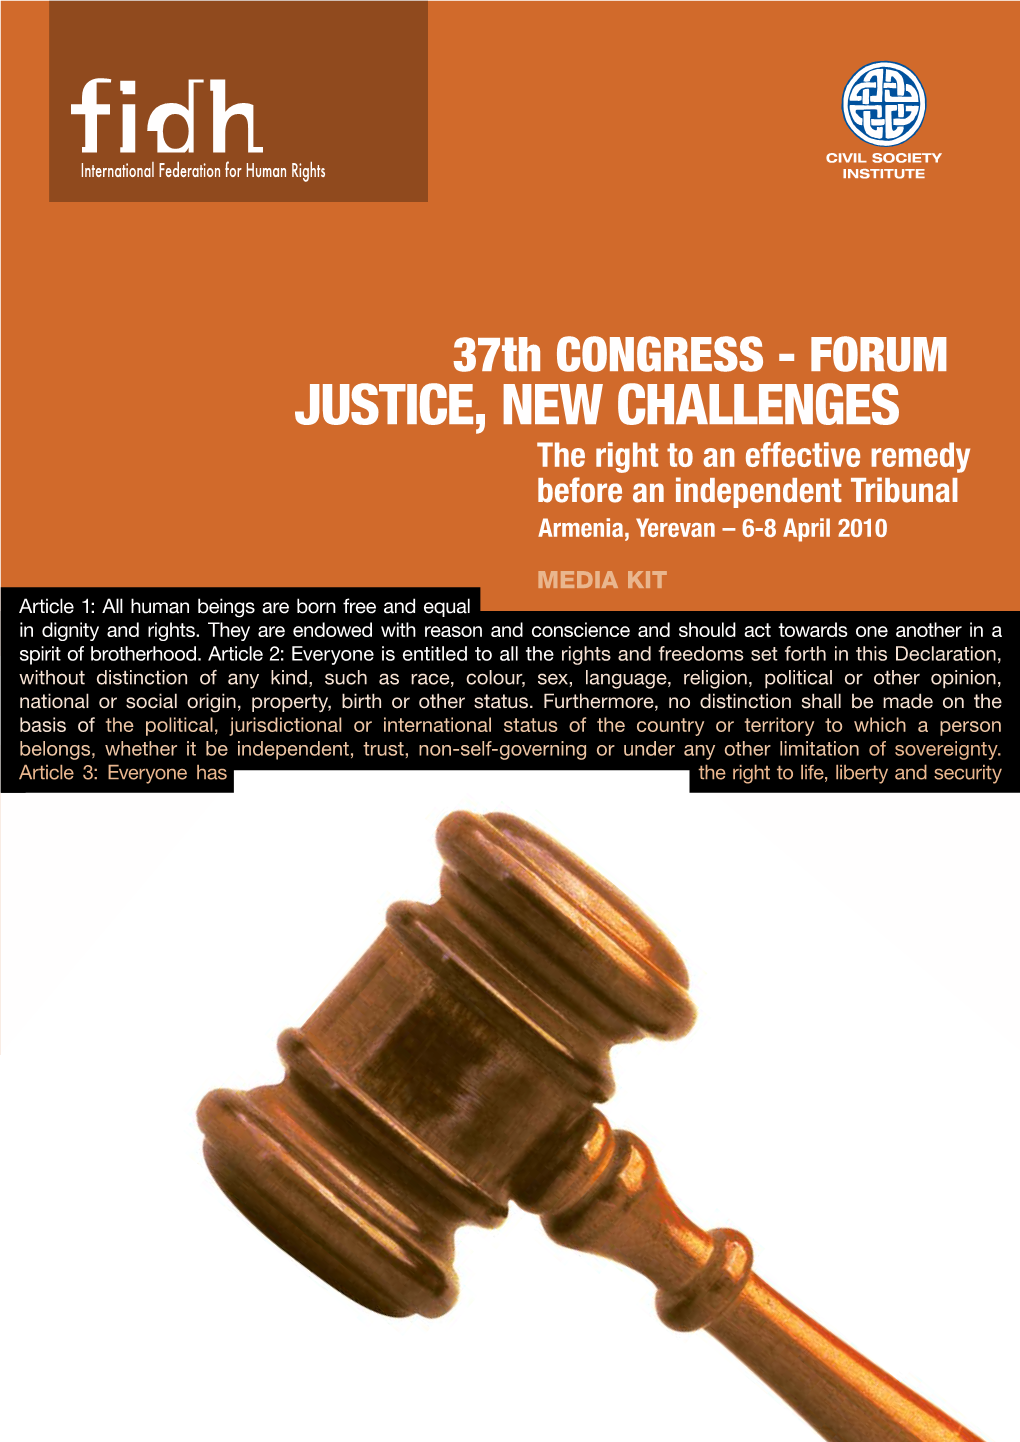 Justice, New Challenges the Right to an Effective Remedy Before an Independent Tribunal Armenia, Yerevan – 6-8 April 2010